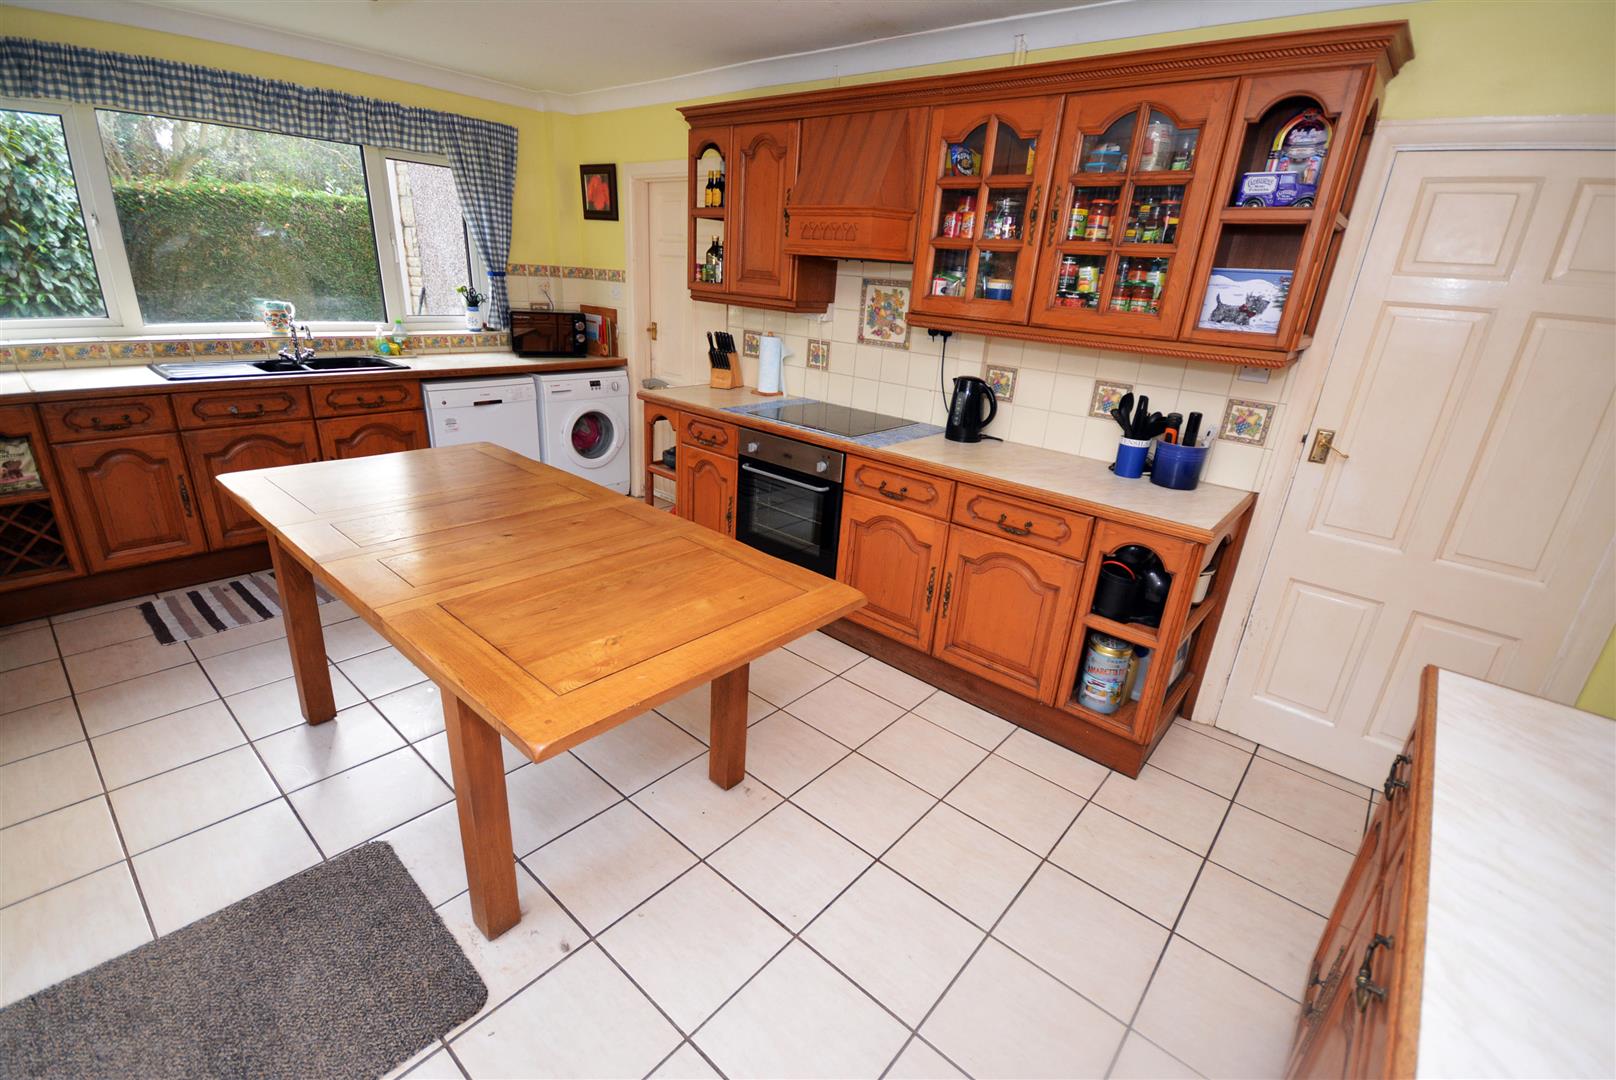 3 bed  for sale in Wellfield Road, Cardiff  - Property Image 1